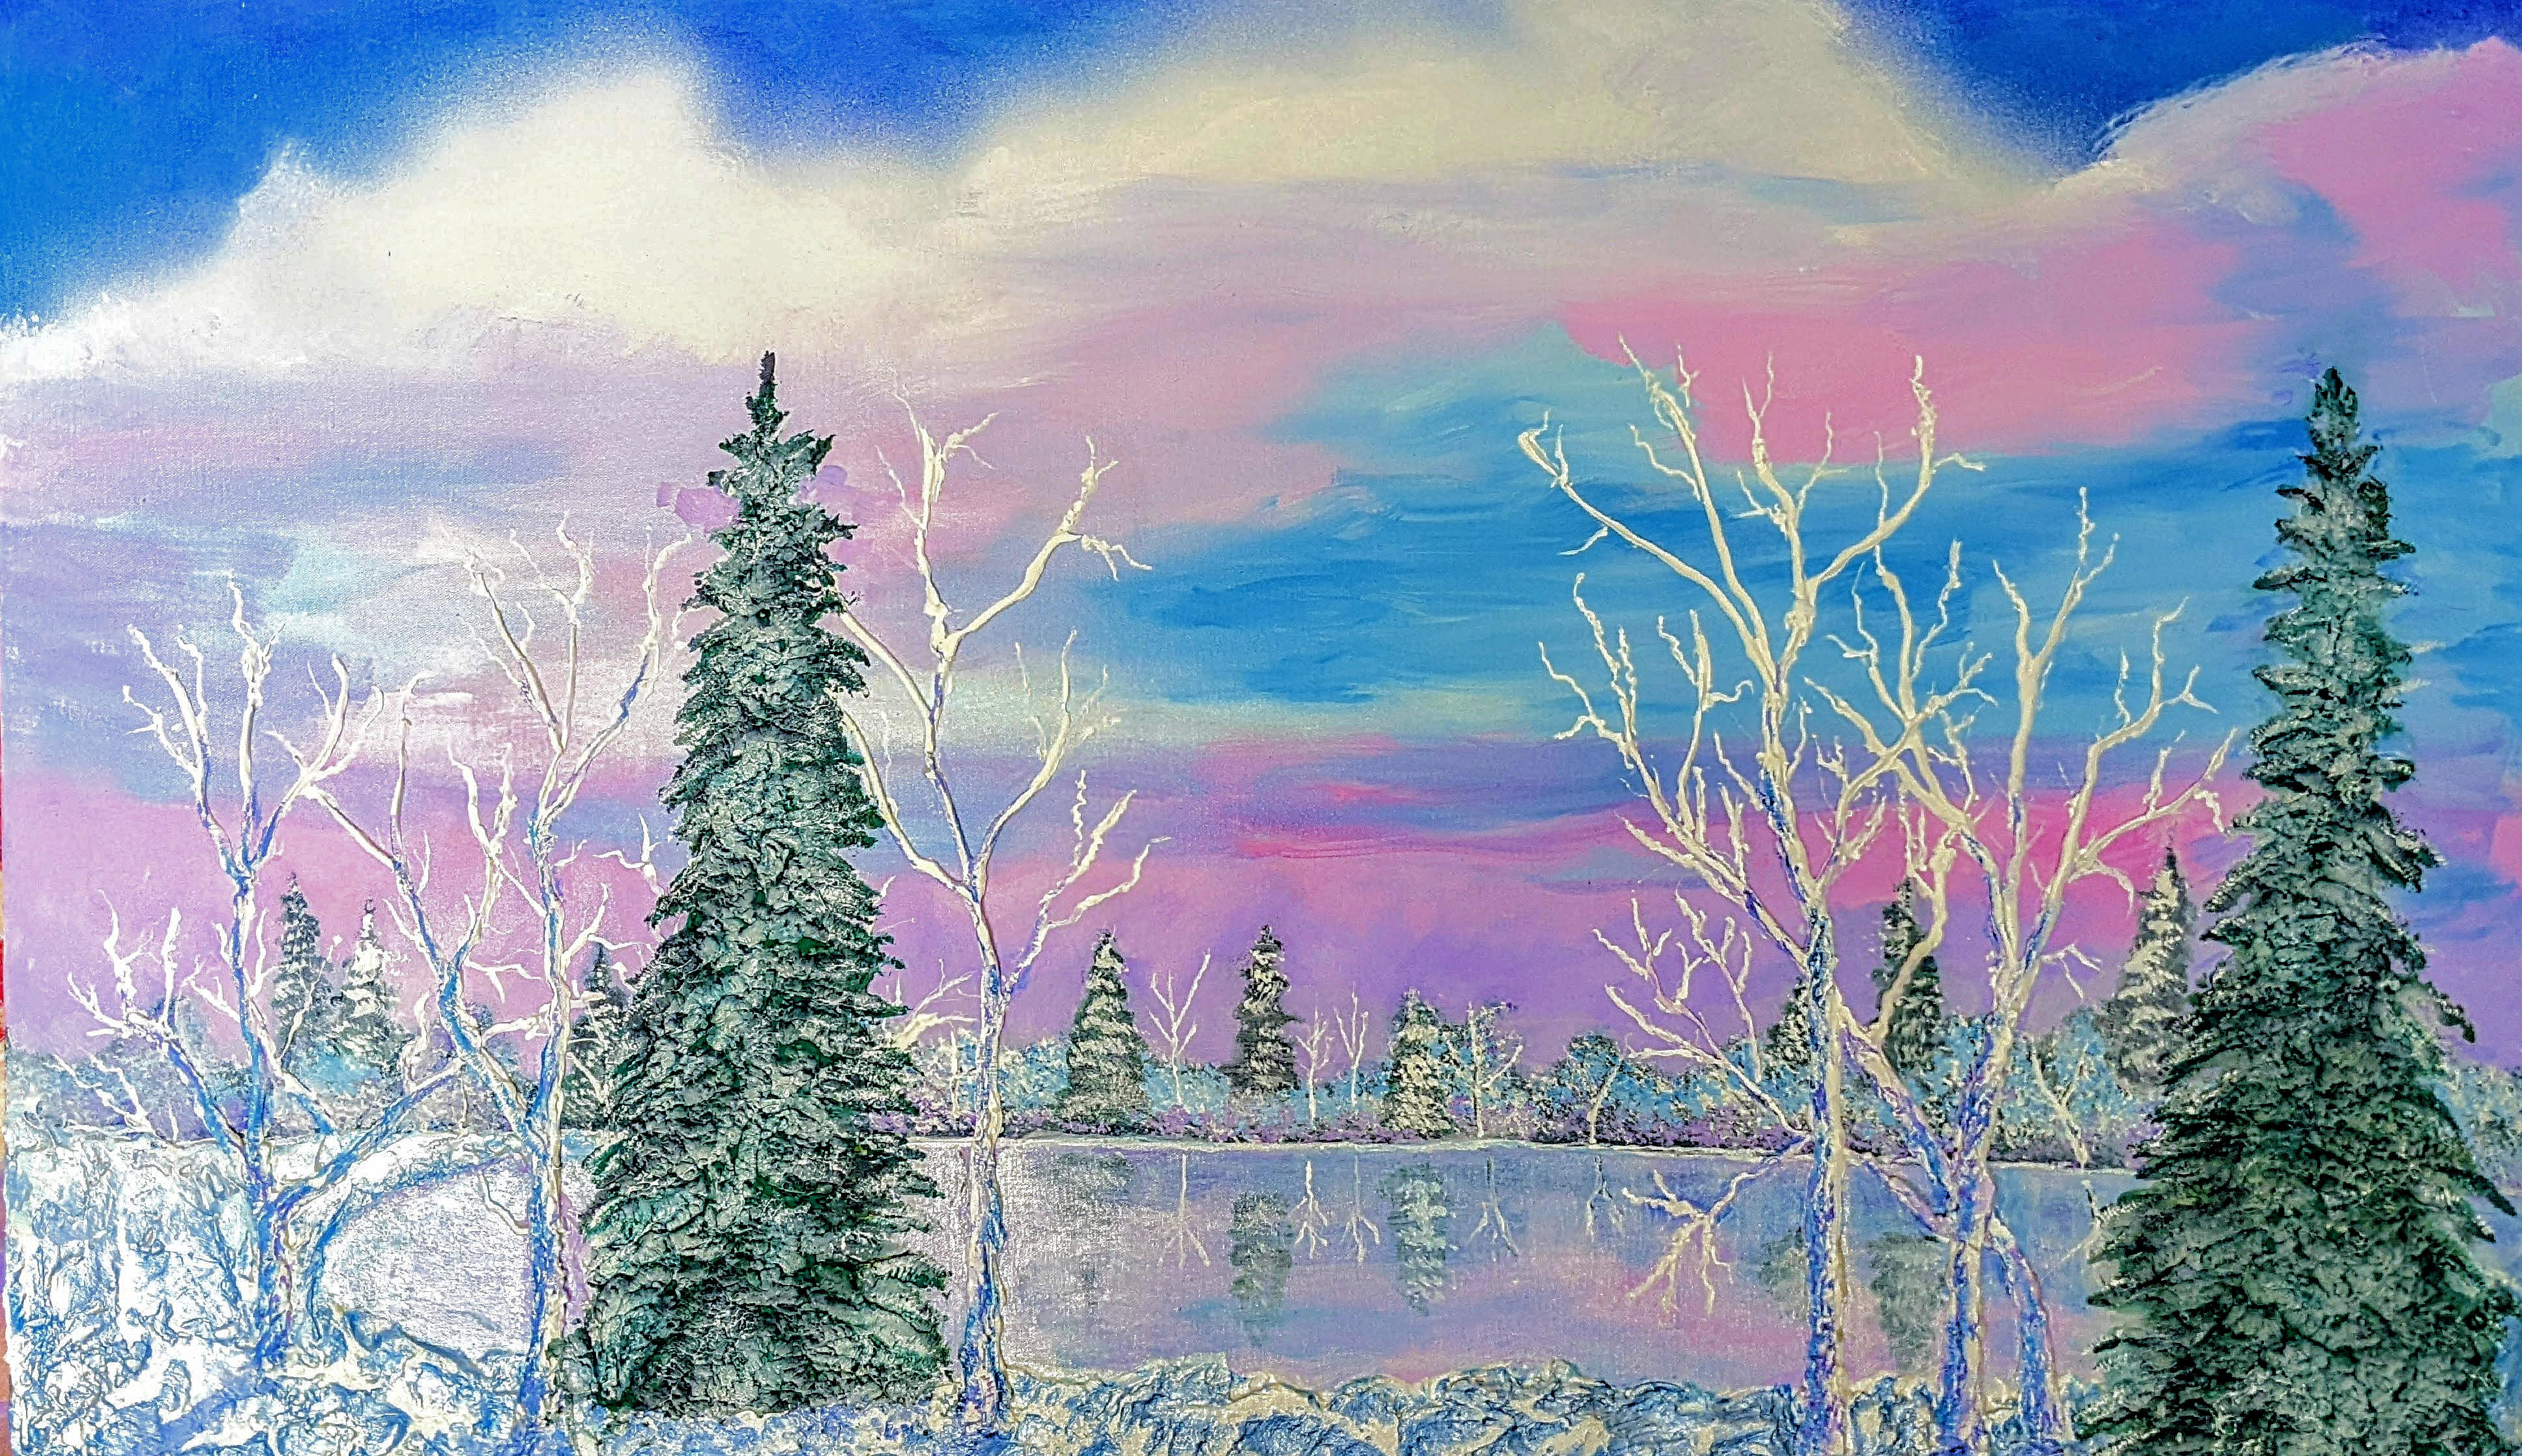 https://0201.nccdn.net/4_2/000/000/001/bc3/winter-pond-in-eau-claire-----30x48---highlighted-with-glow-in-d.jpg